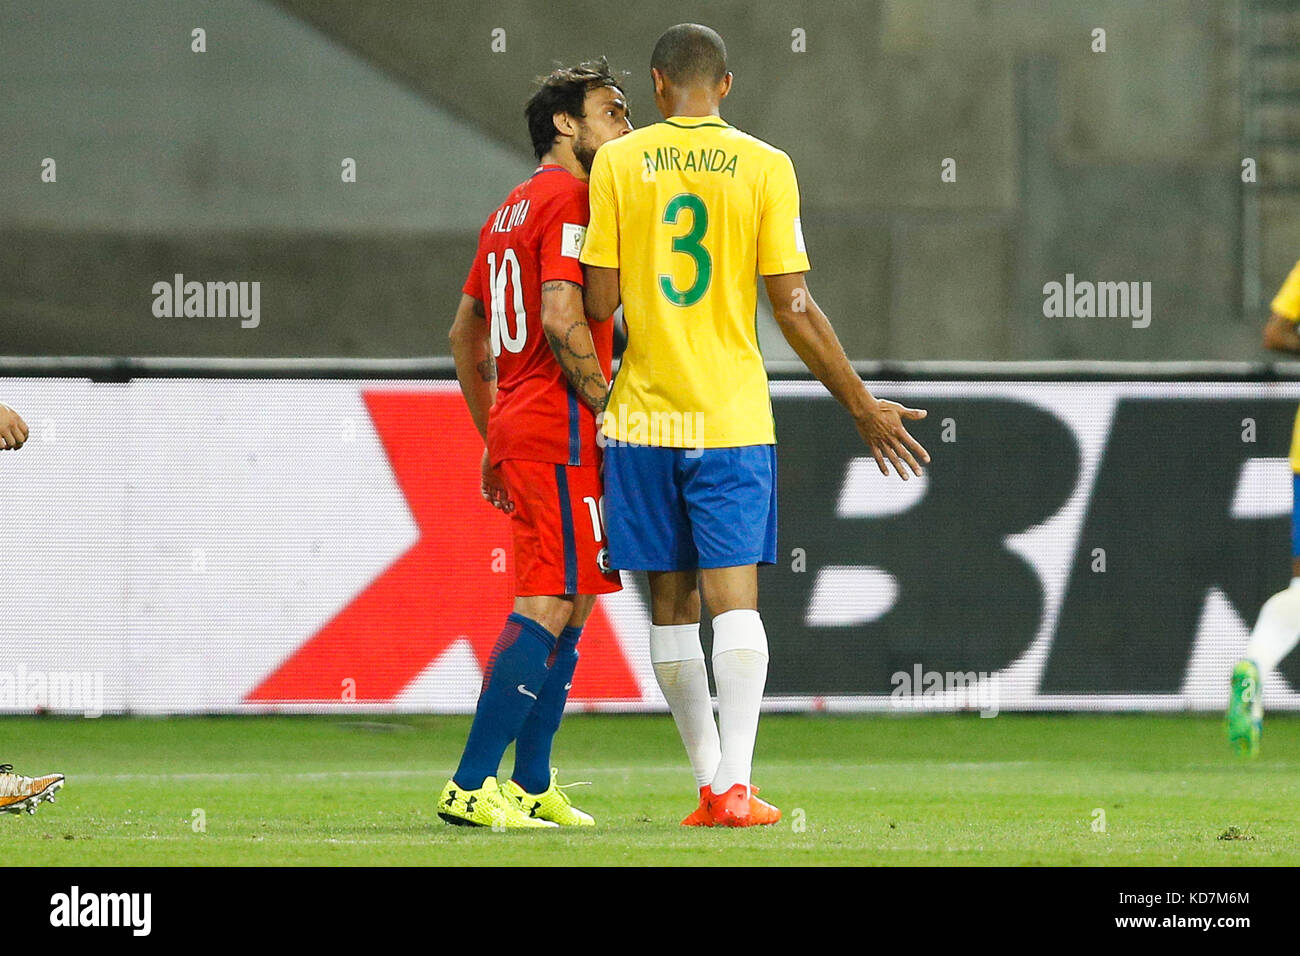 Sao Paulo, Brazil. 10th Oct, 2017. Jorge Valdivia of Chile complains with Miranda do Brasil during a match between Brazil and Chile valid for the last round of the World Cup Qualifiers Russia 2018, held at Allianz Parque in the neighborhood of Barra Funda, west of the capital. Credit: Foto Arena LTDA/Alamy Live News Stock Photo